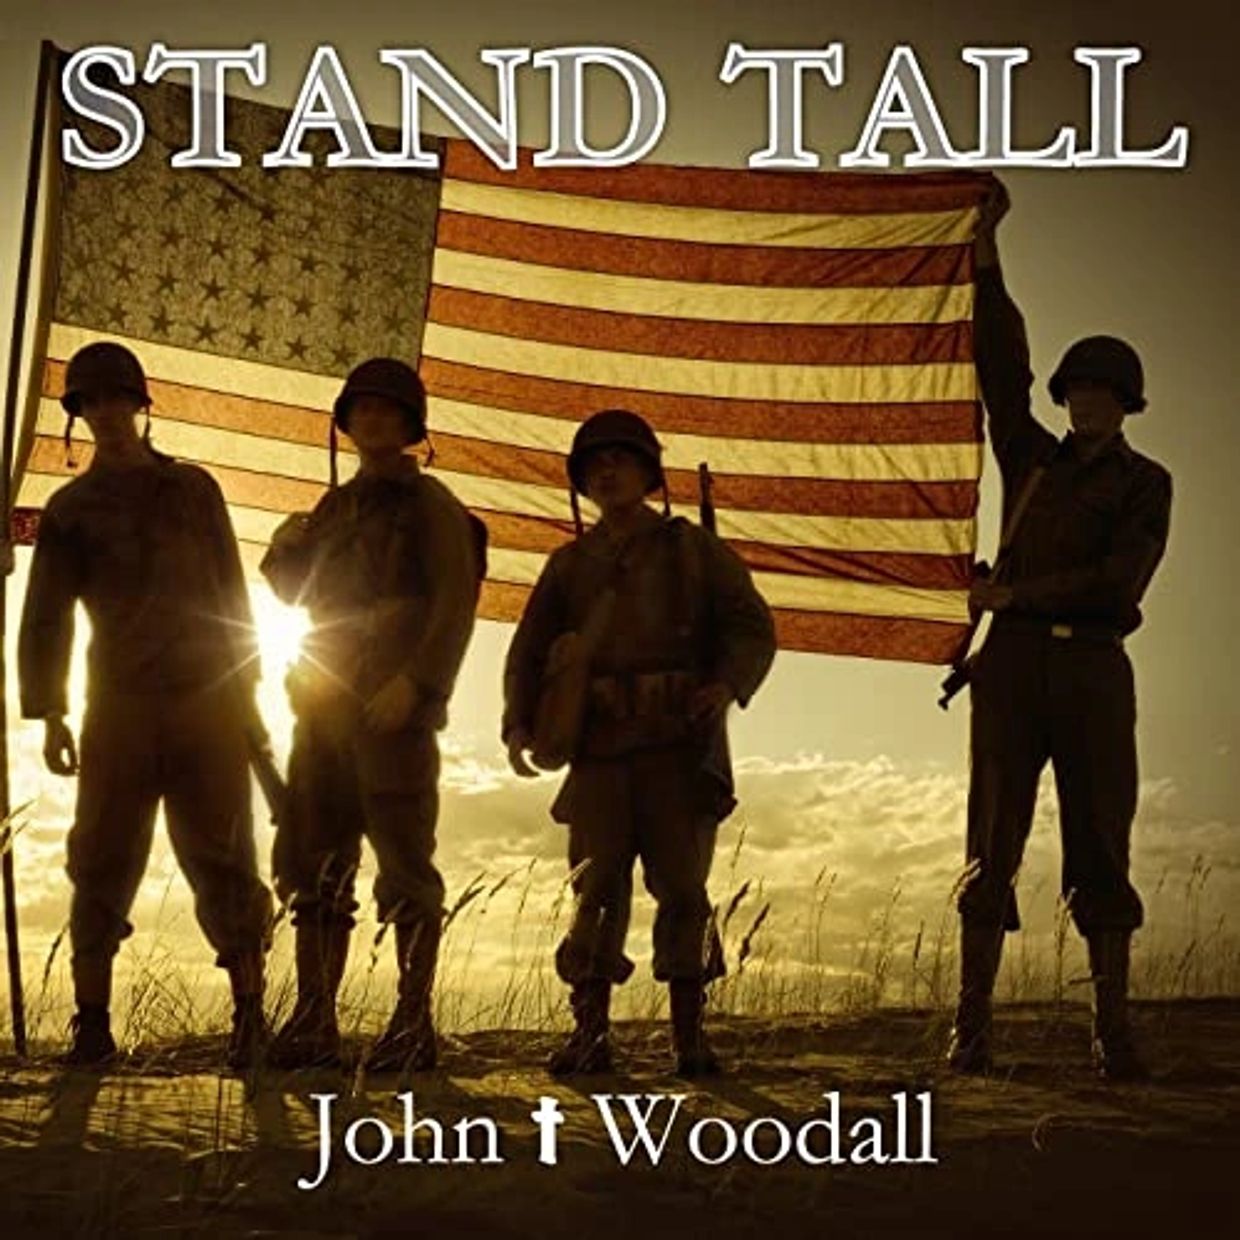 Camp4Heroes' Executive Director, John T Woodall's song he wrote, "Stand Tall"